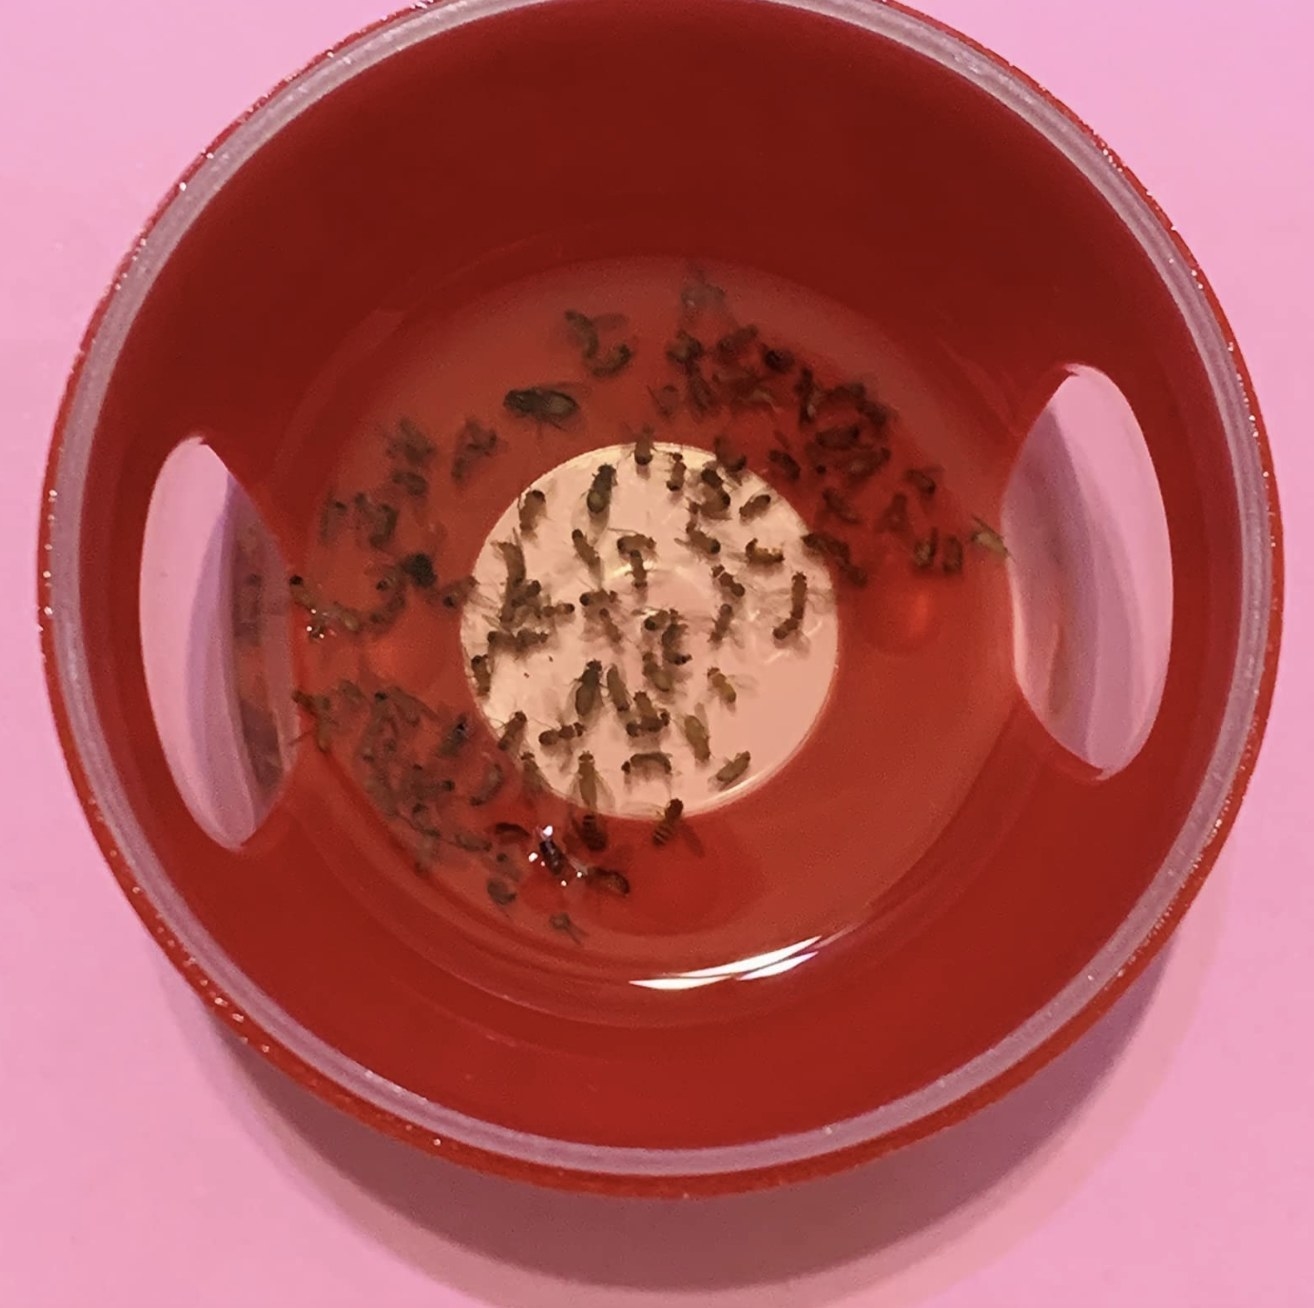 reviewer photo showing the fruit fly trap filled with dead fruit flies